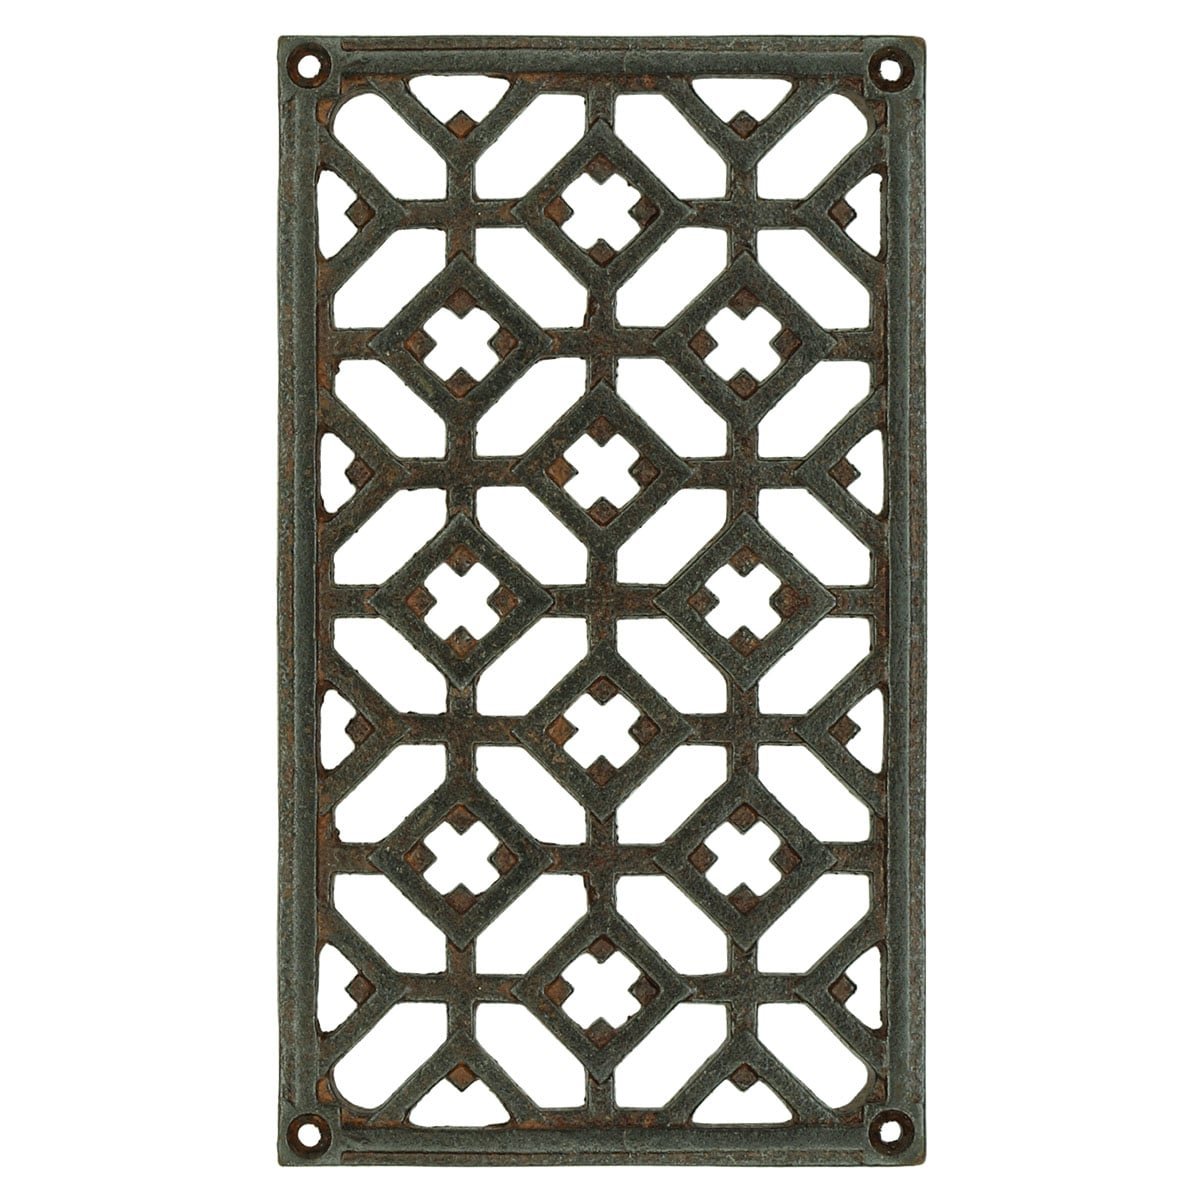 Hardware Grilles & Grates Grille decorative doors square Coswig - 180 mm